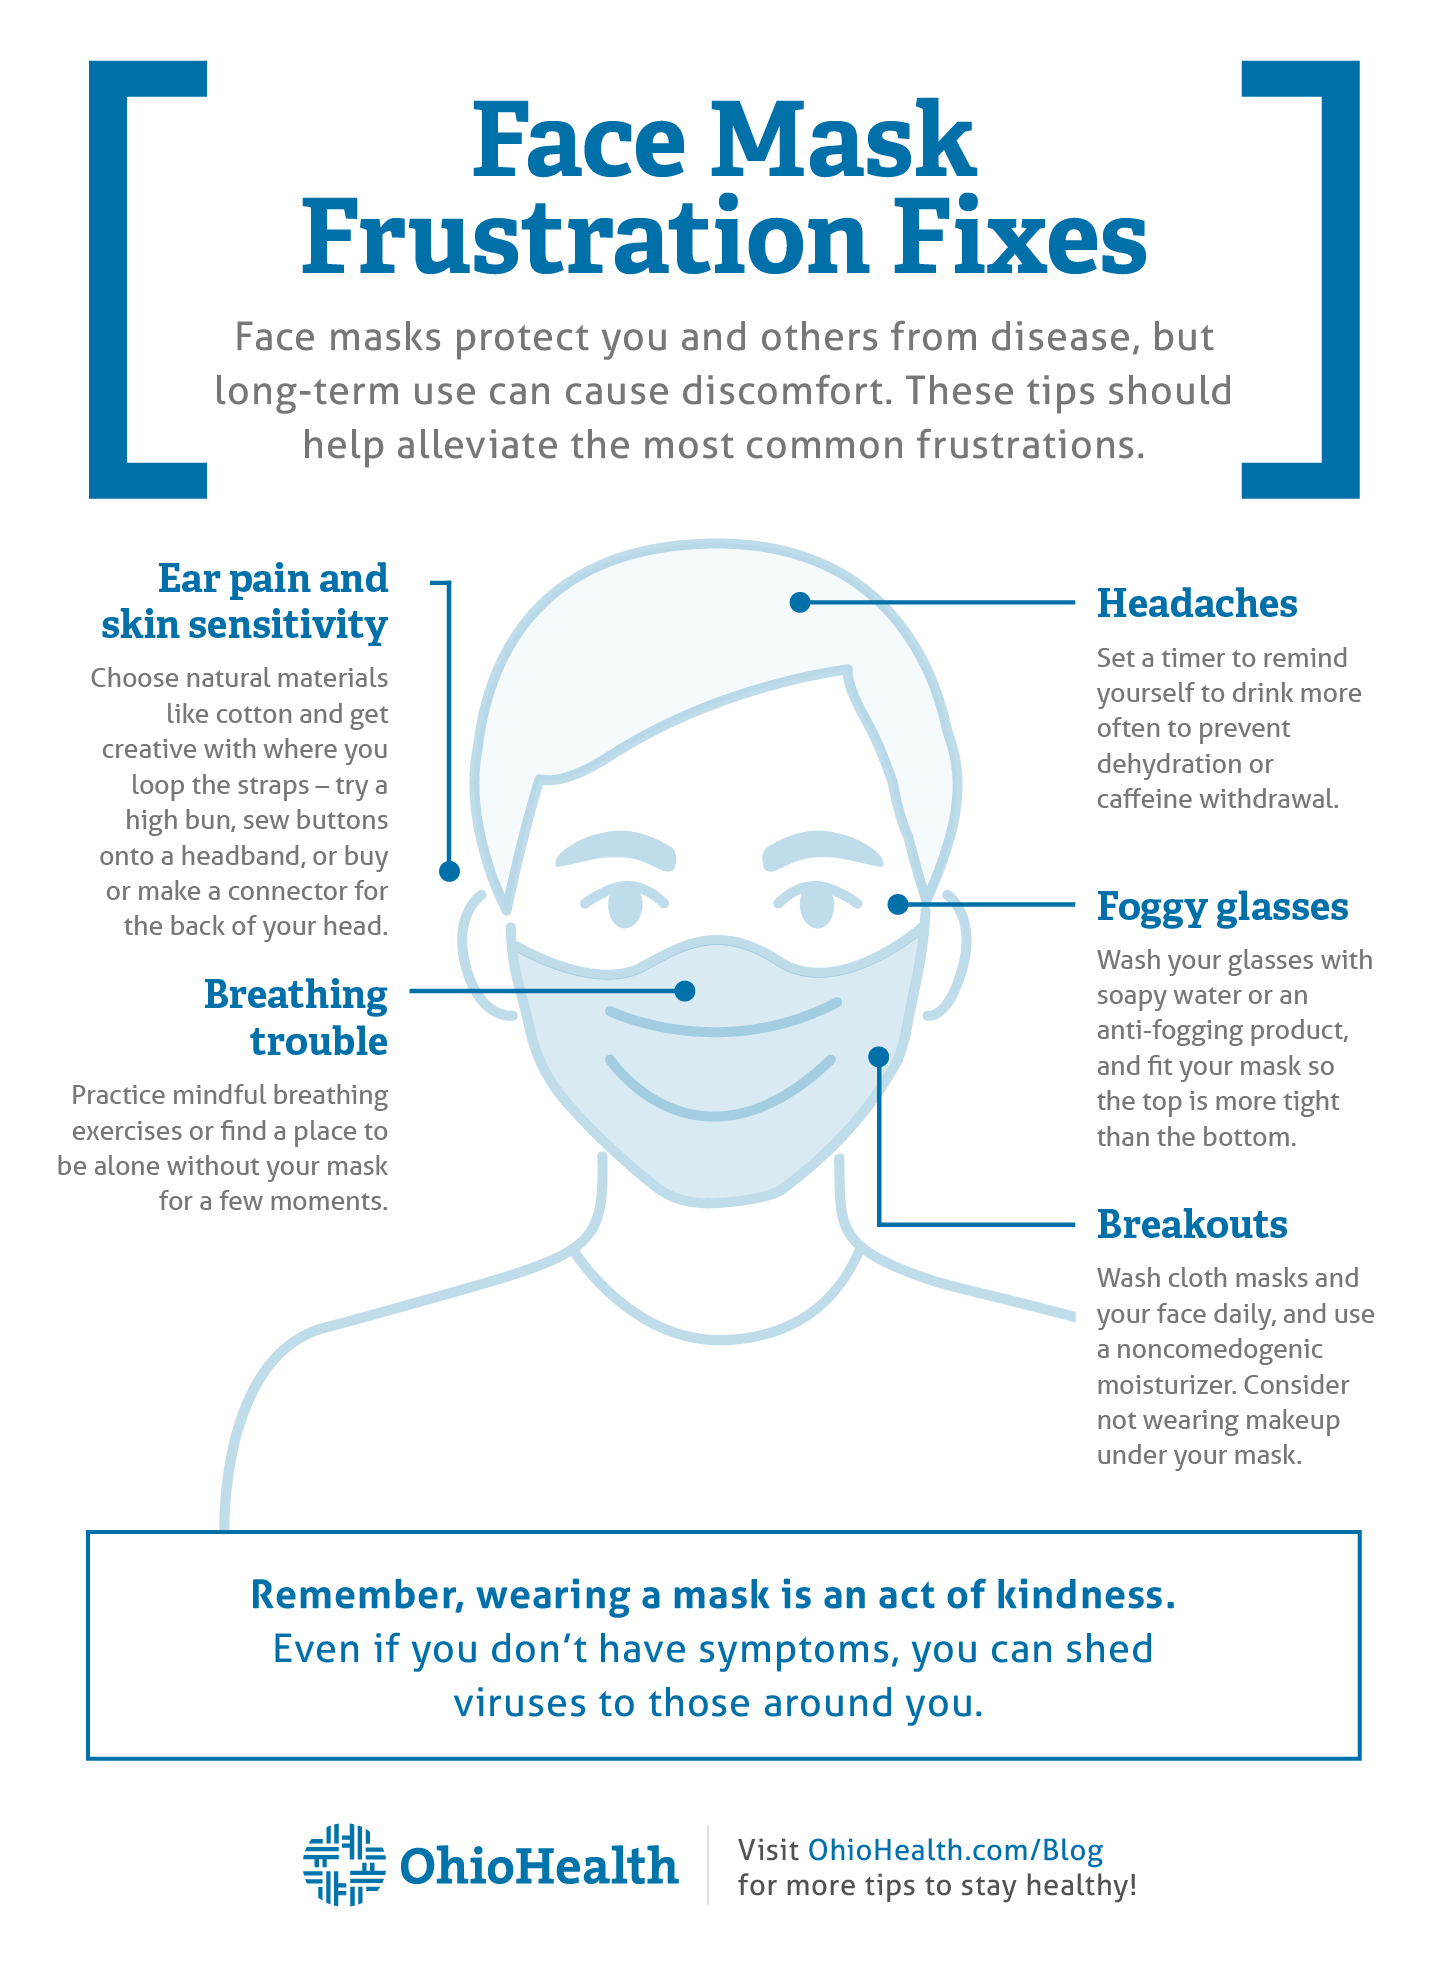 Infographic giving tips for making face masks more comfortable to wear